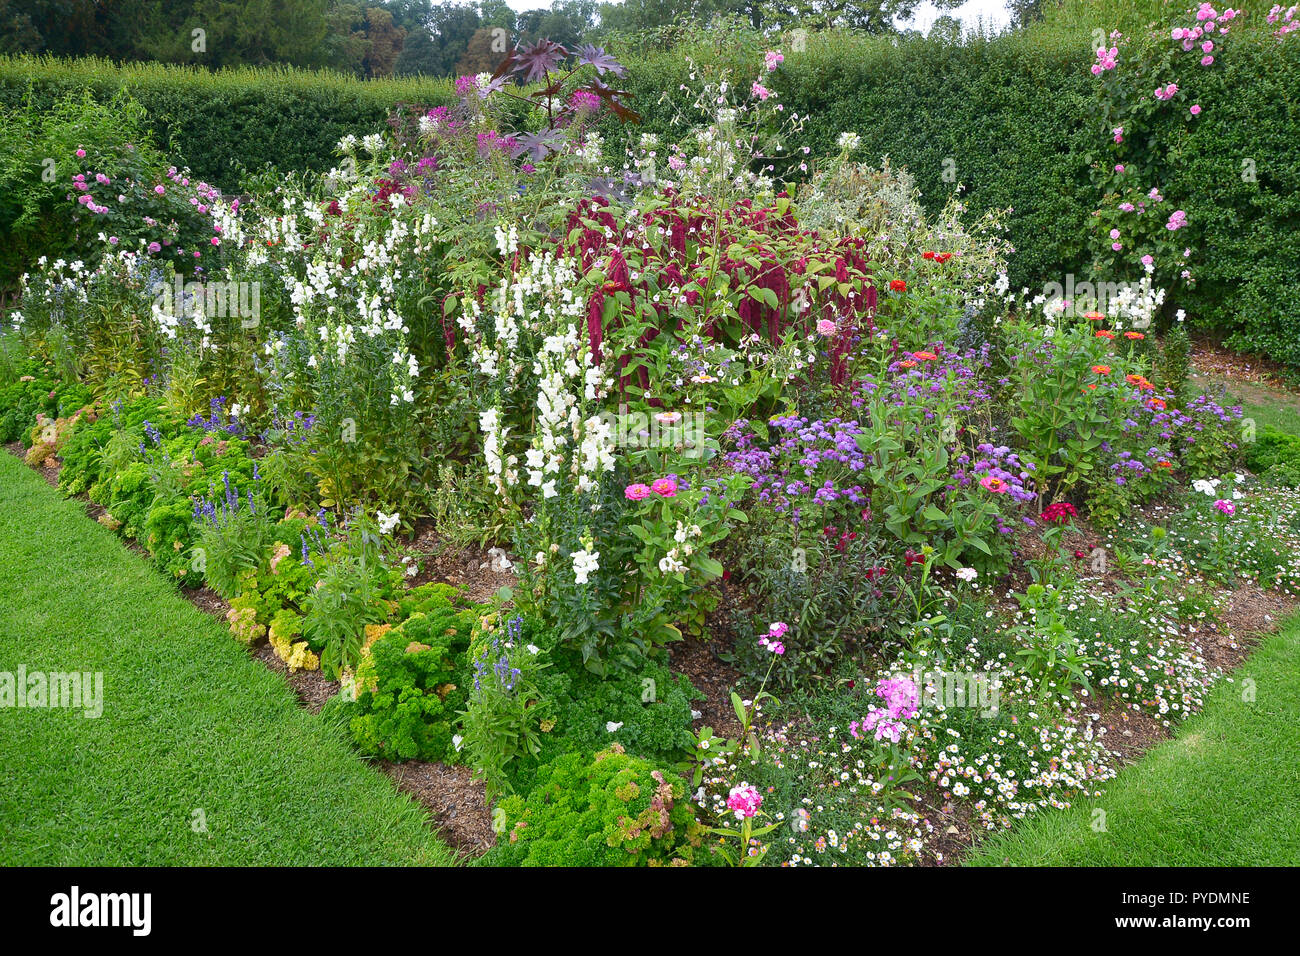 Colourful flower border with mixed planting including roses, amaranthus, zinnia and antirrhinums Stock Photo